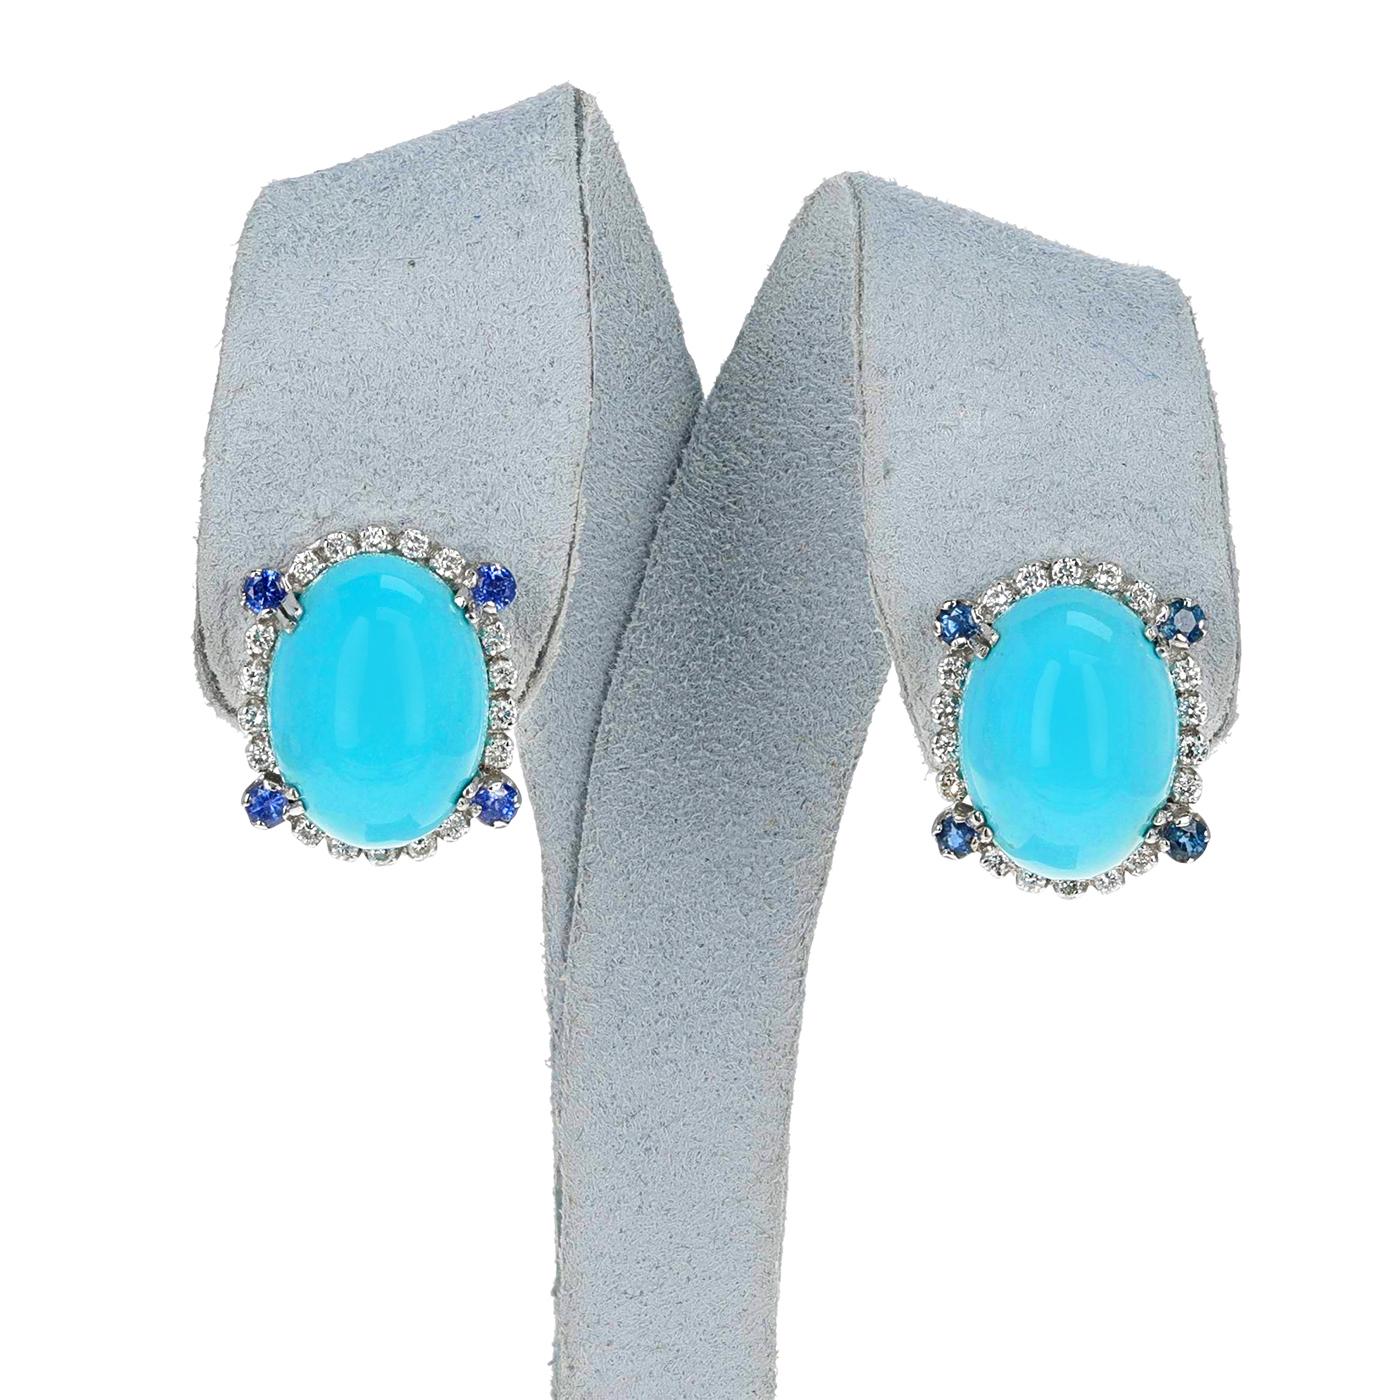 A Turquoise Oval Cabochon Earrings with Diamonds and Sapphire, 18k. The total weight of the diamonds is 0.80 carats and the sapphires weigh 0.40 carats. The earrings weigh 11.88 grams and the size is 0.75